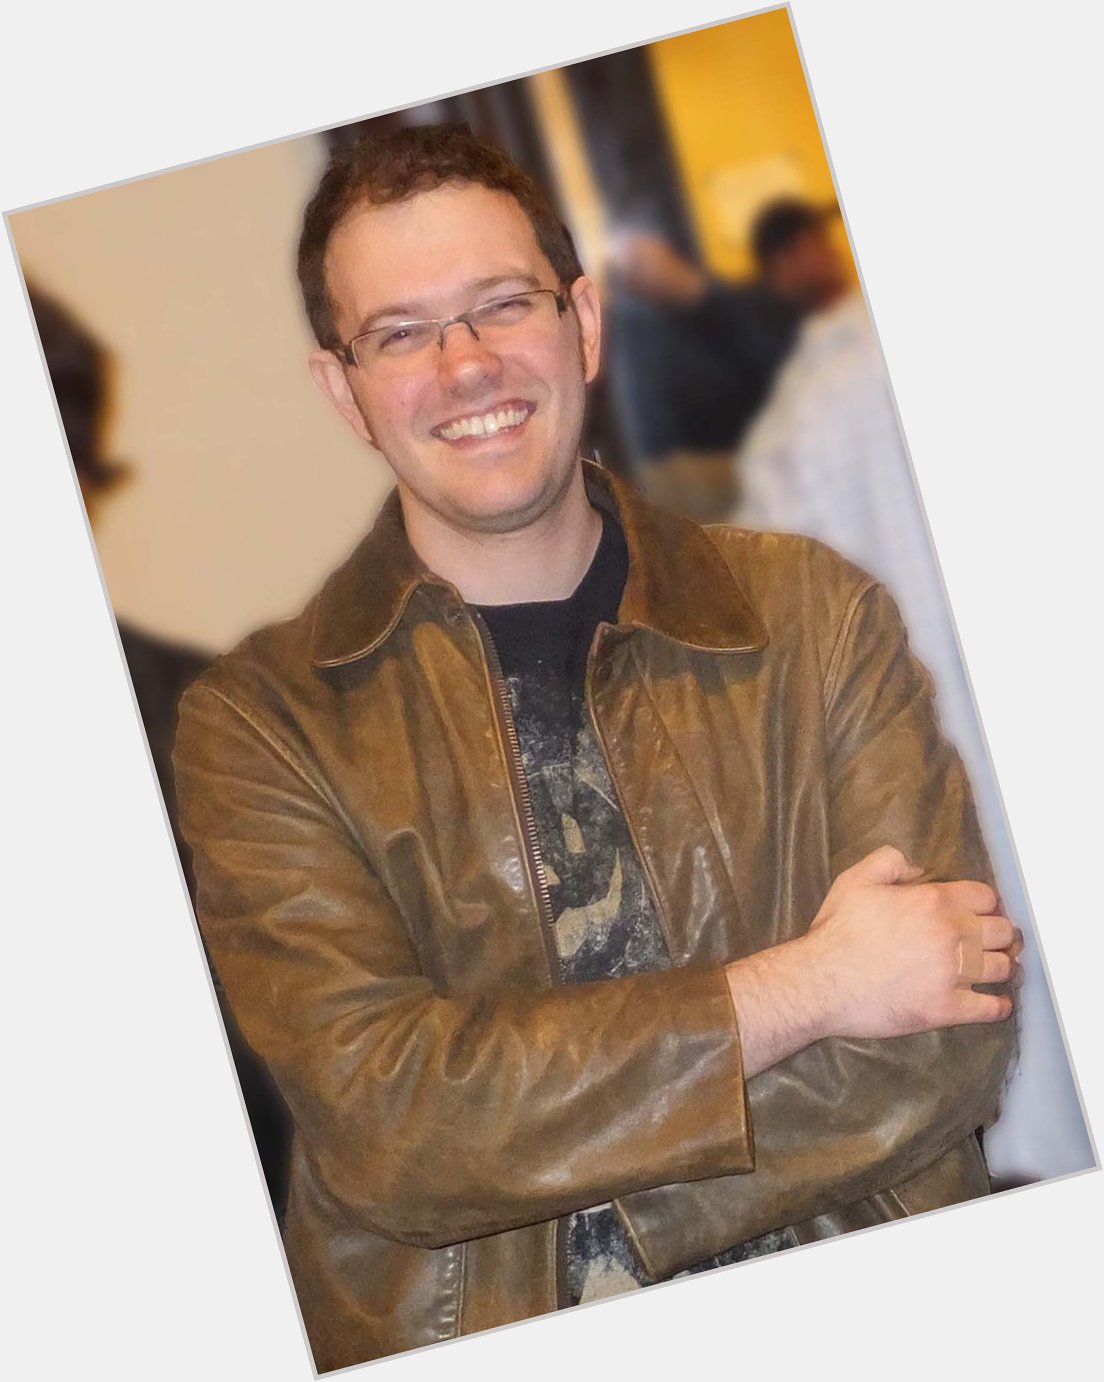 I would like to wish a happy birthday to James Rolfe, a.k.a. the Angry Video Game Nerd! 